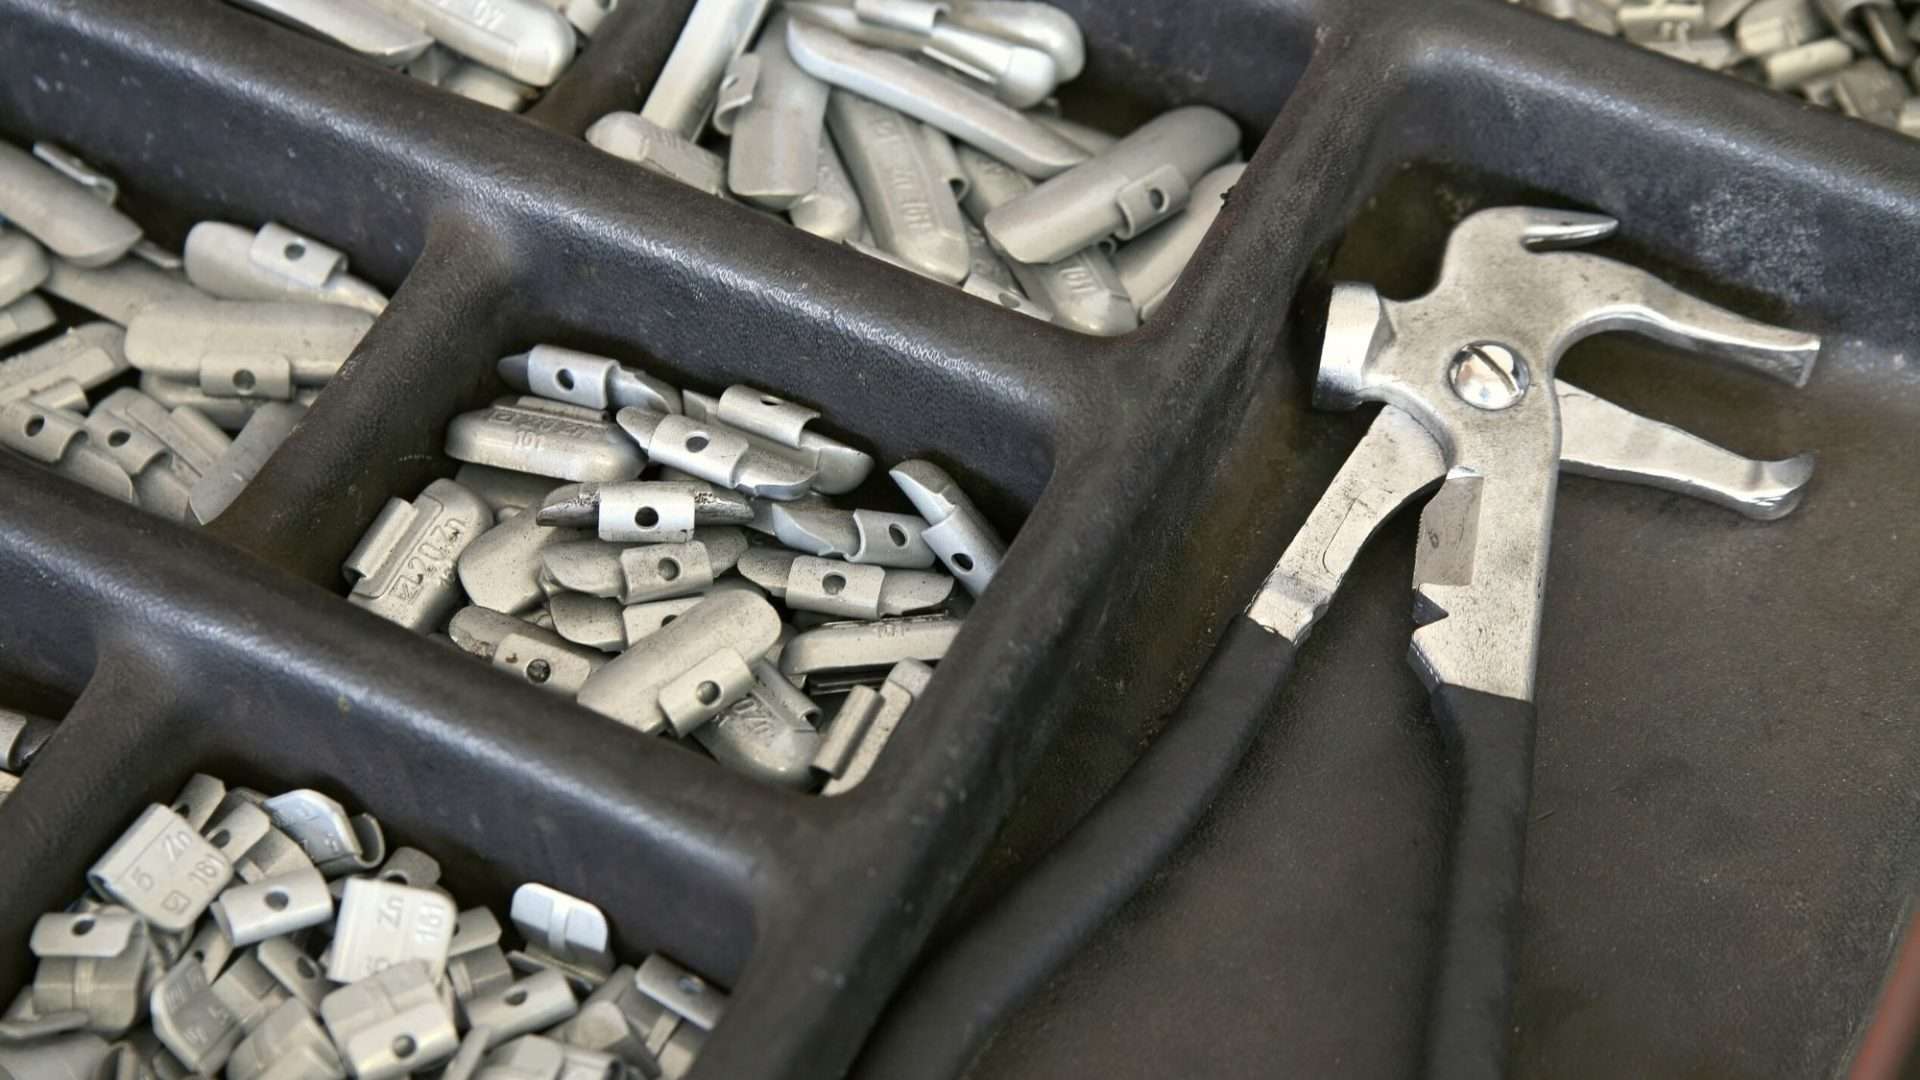 Tray of wheel weights for balancing tires